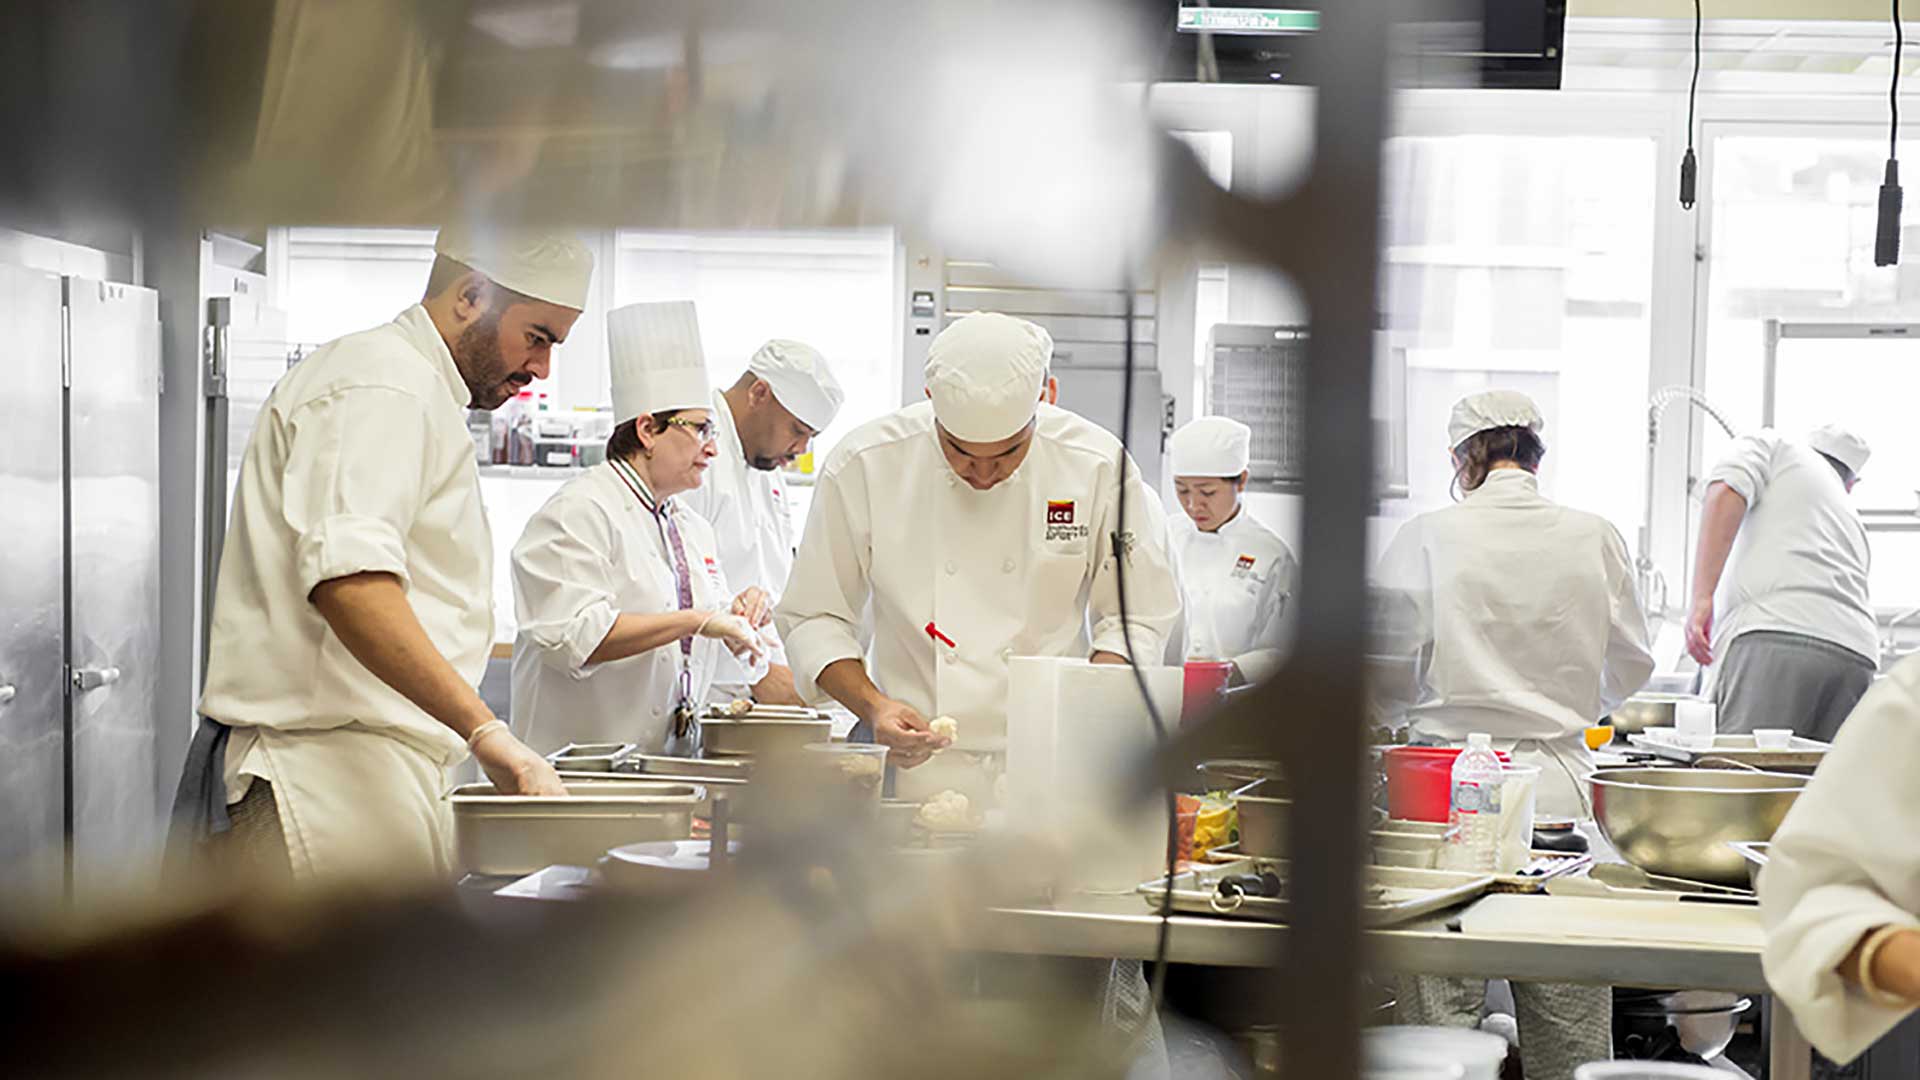 Multiple people in white uniforms working in a commercial kitchen